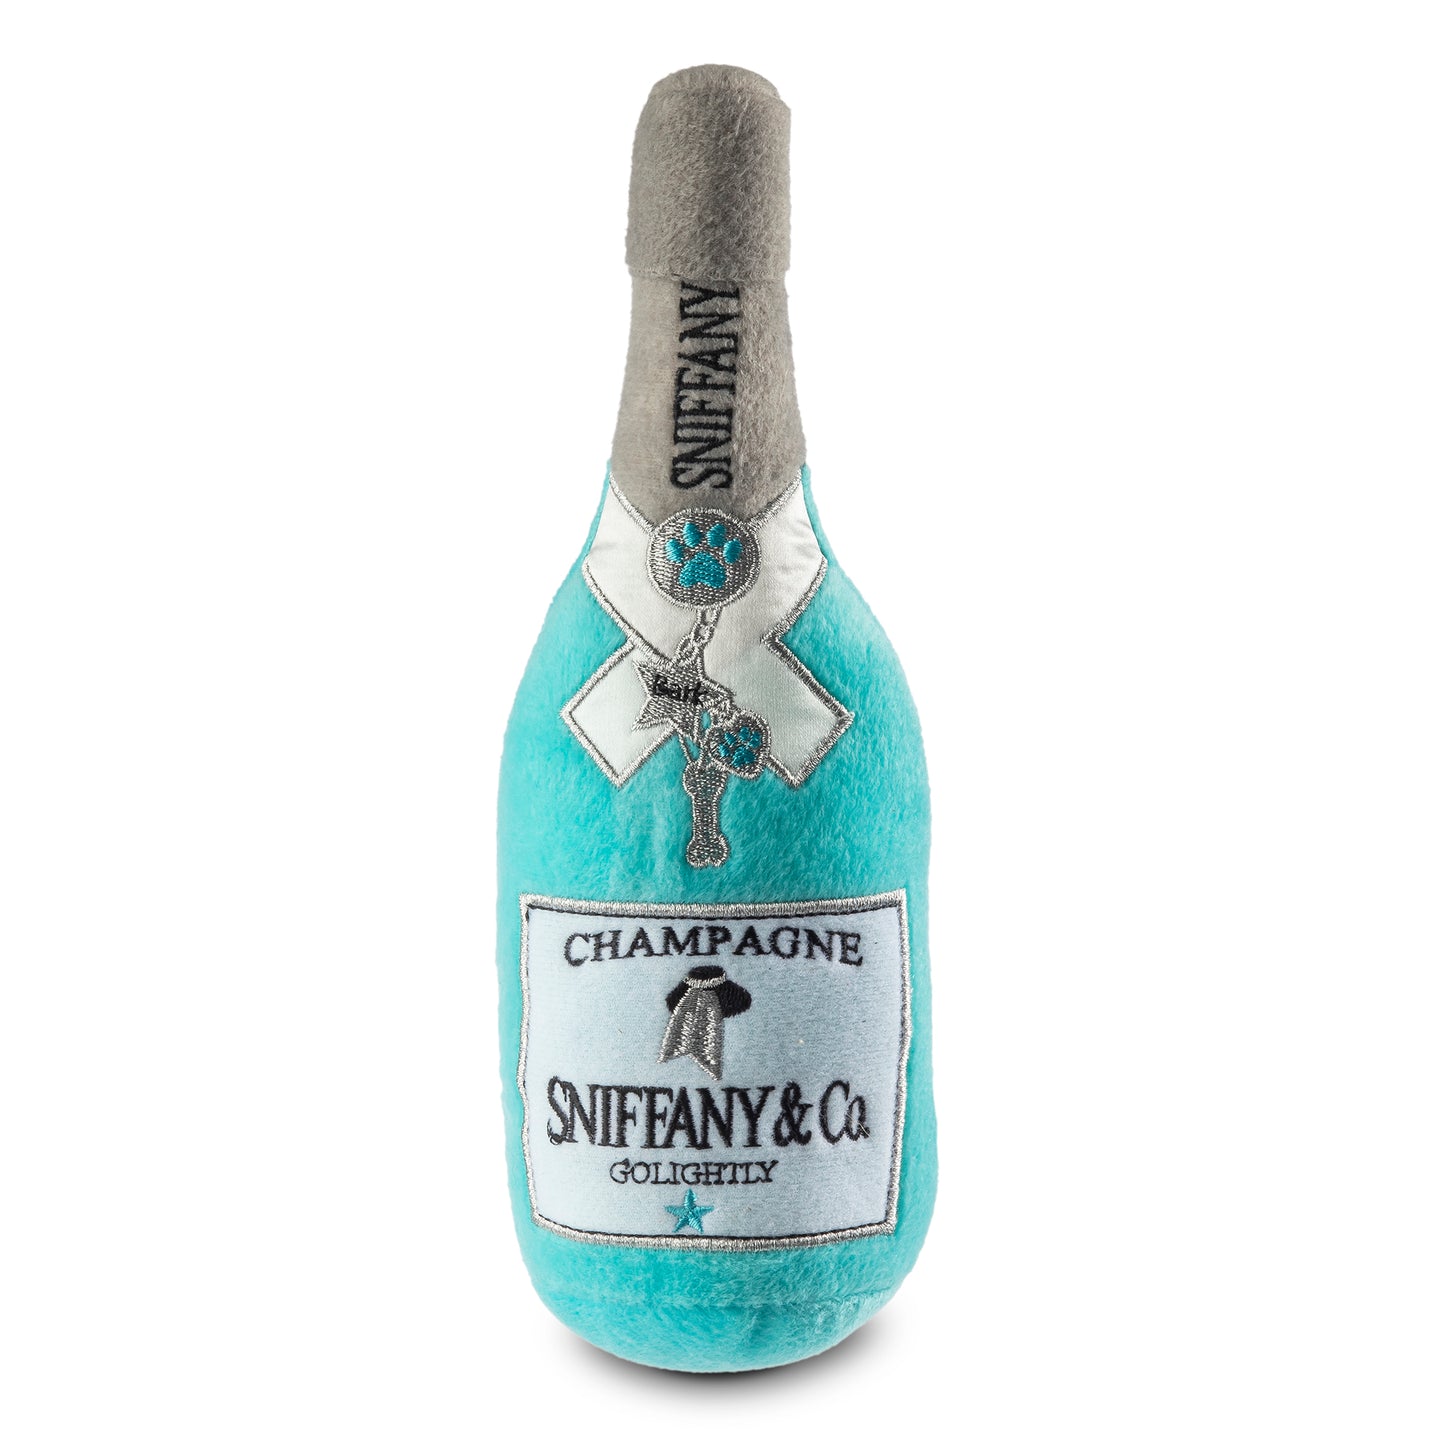 Sniffany & Co. Champagne Toy